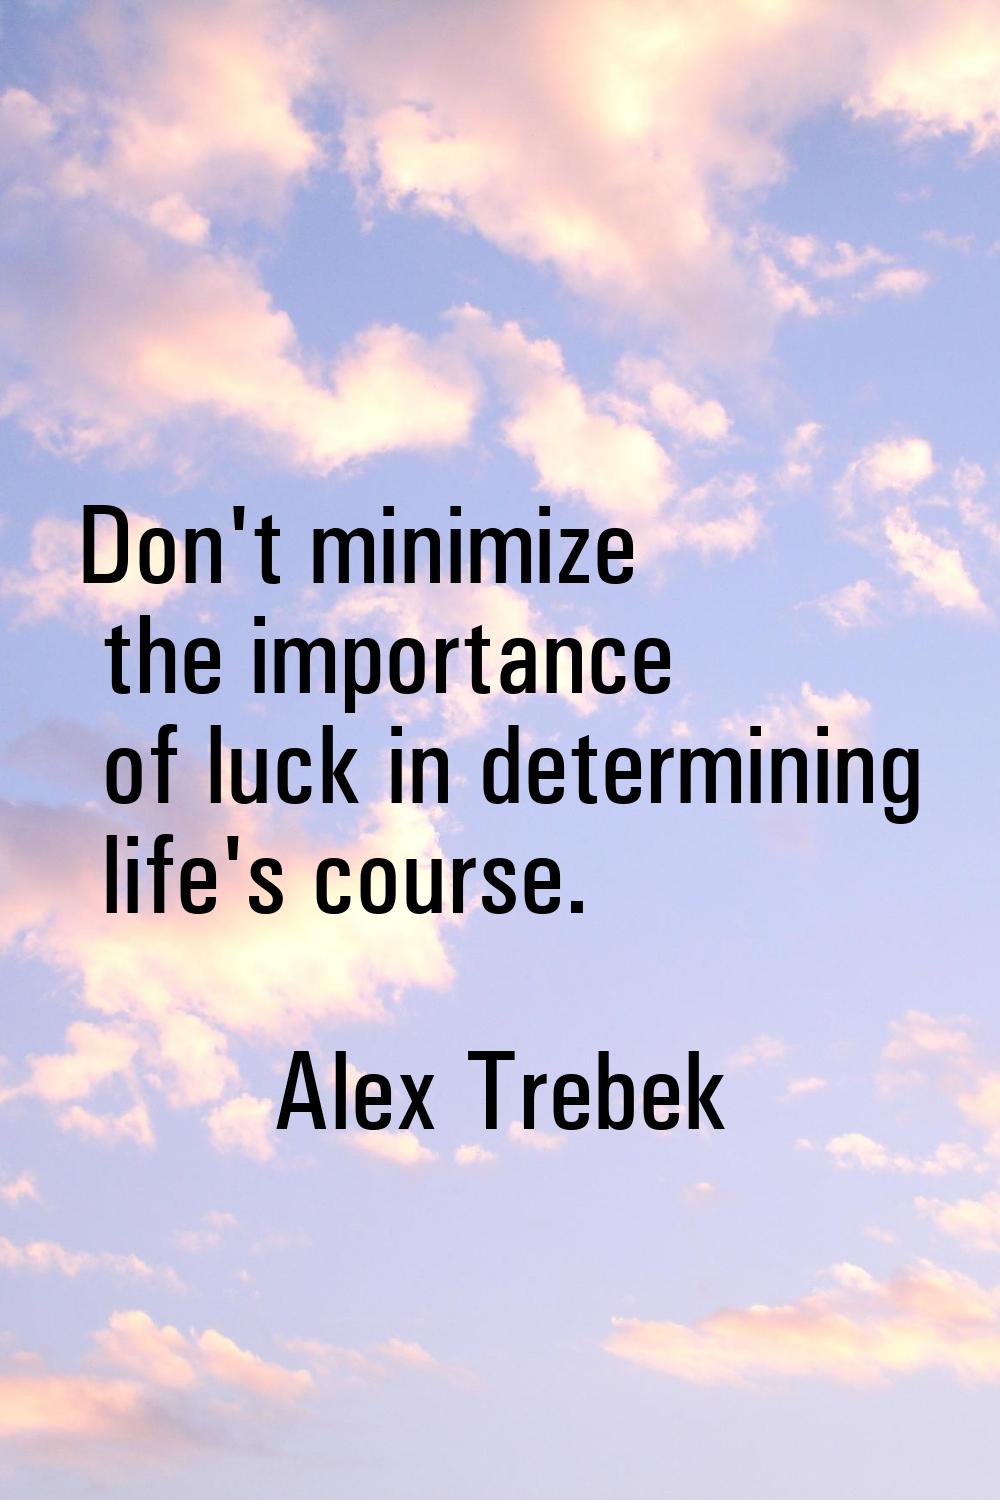 Don't minimize the importance of luck in determining life's course.